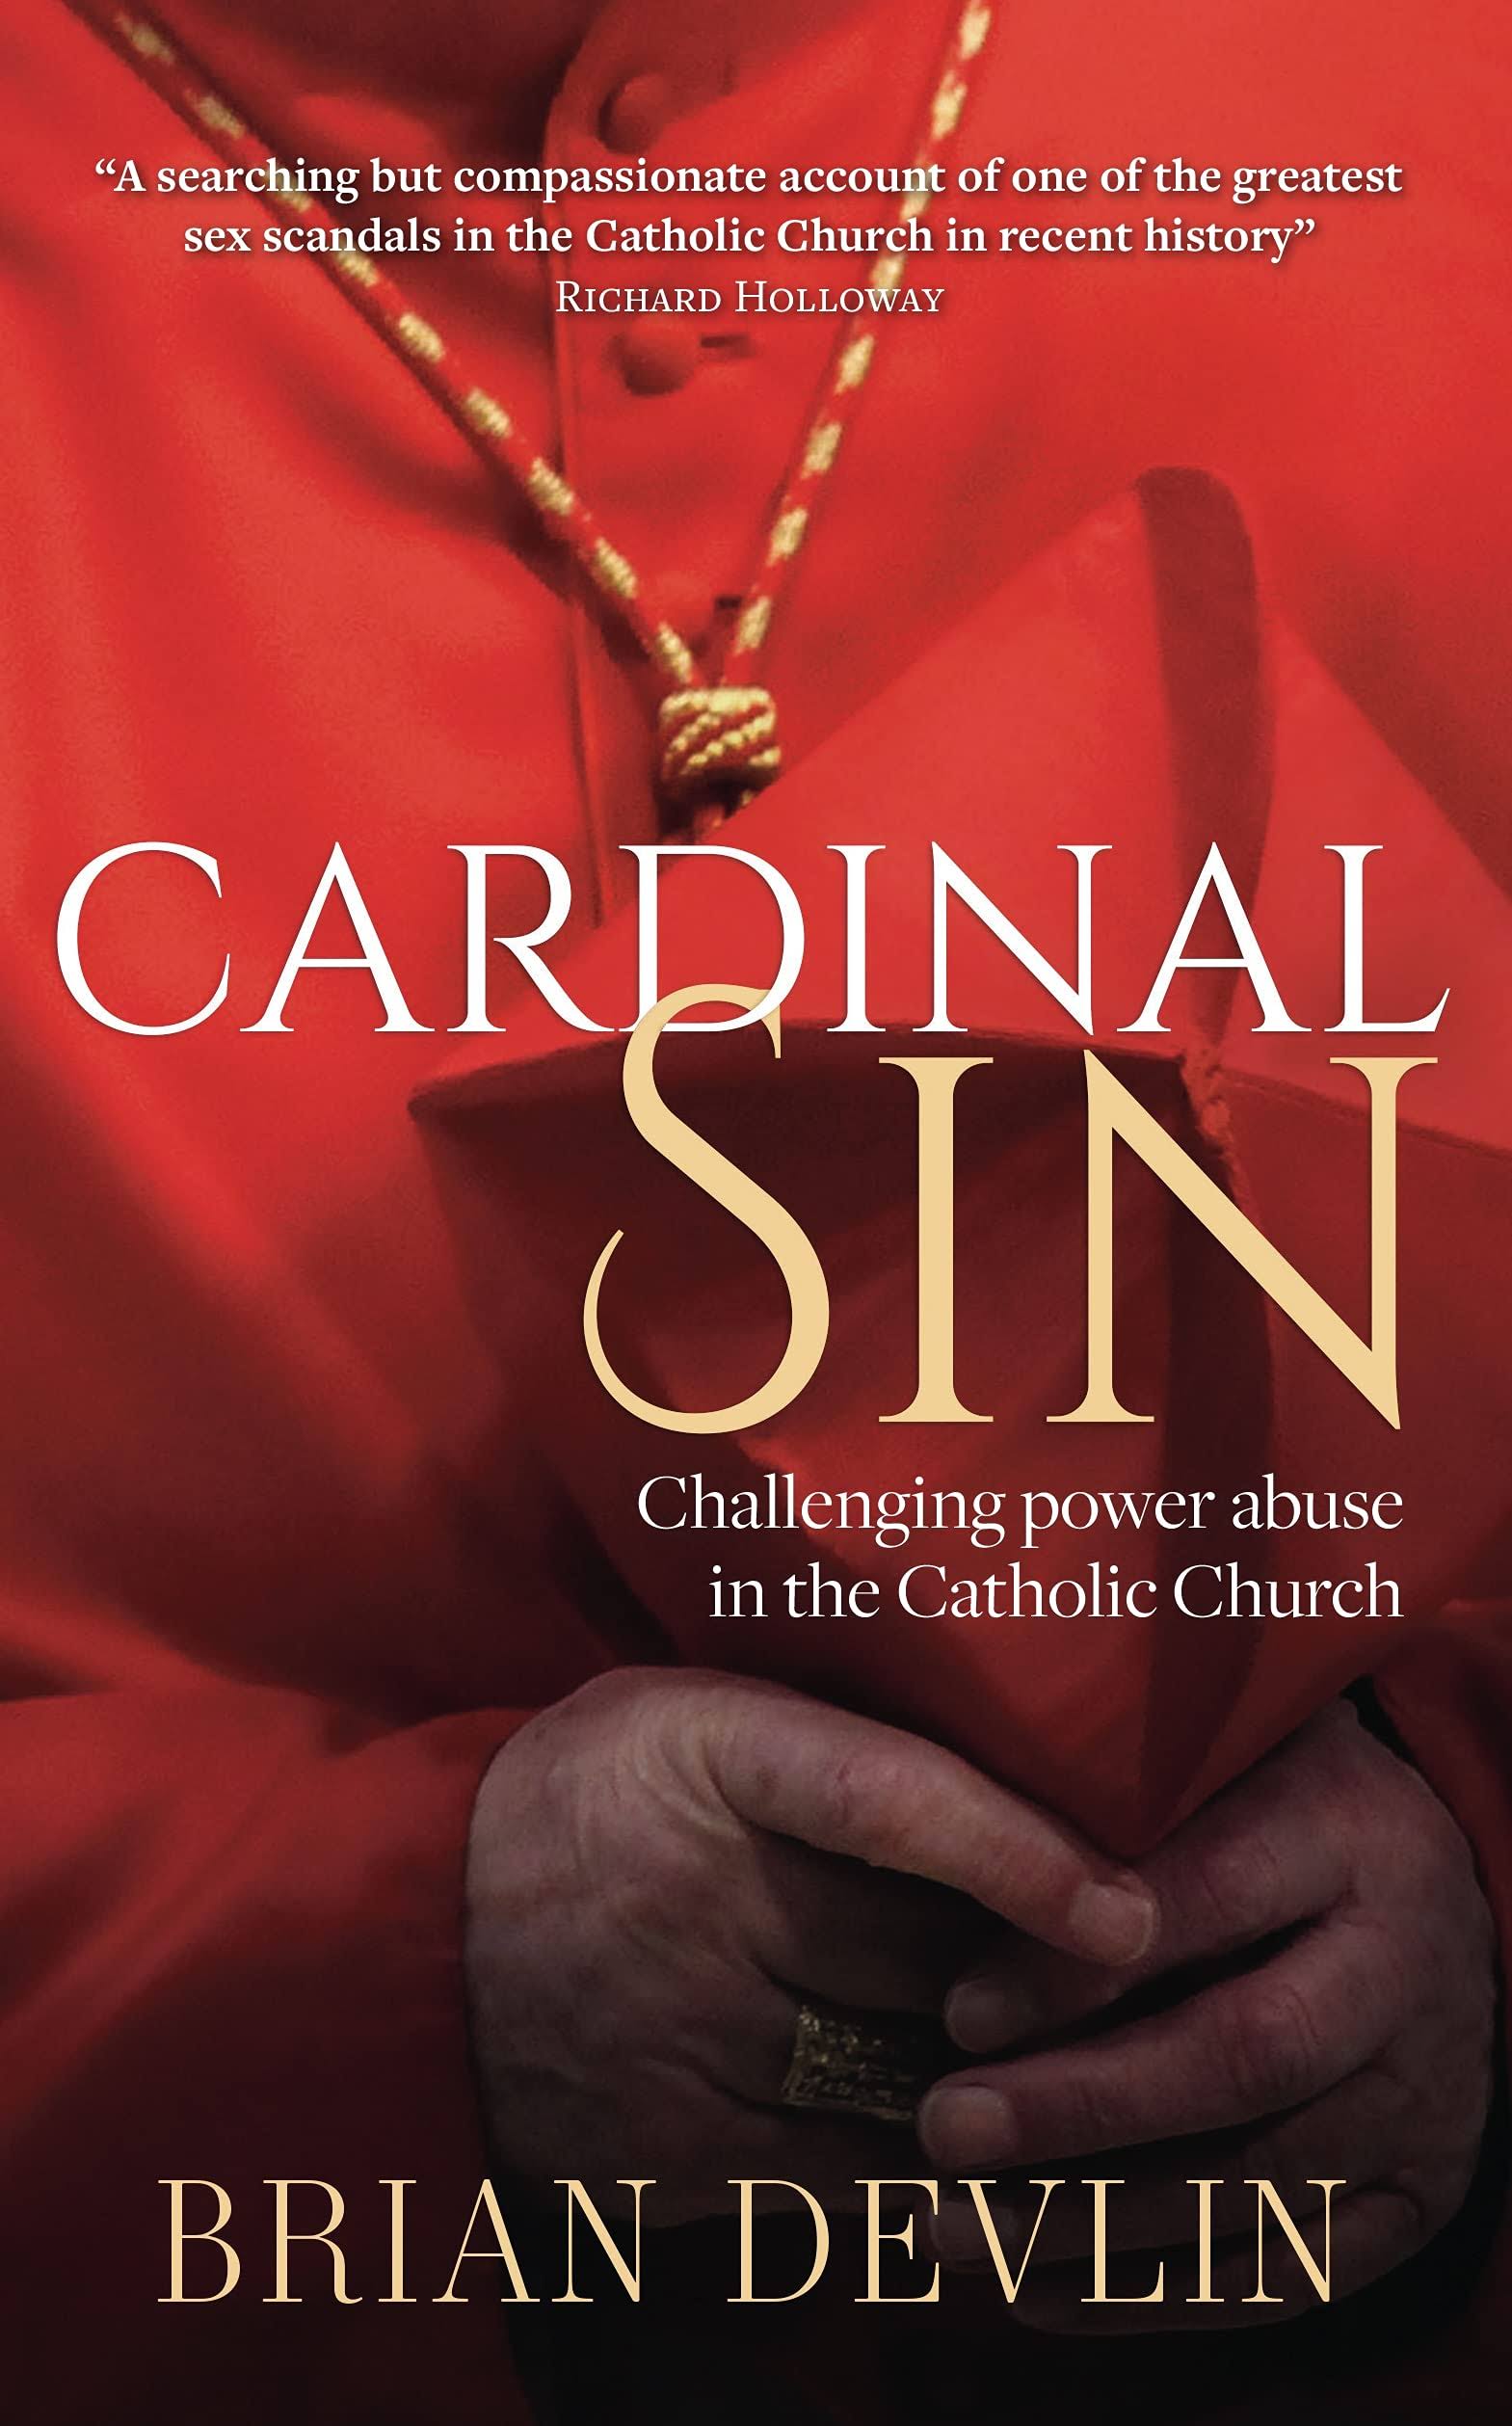 Cardinal Sin: Challenging Power Abuse in the Catholic Church [Book]